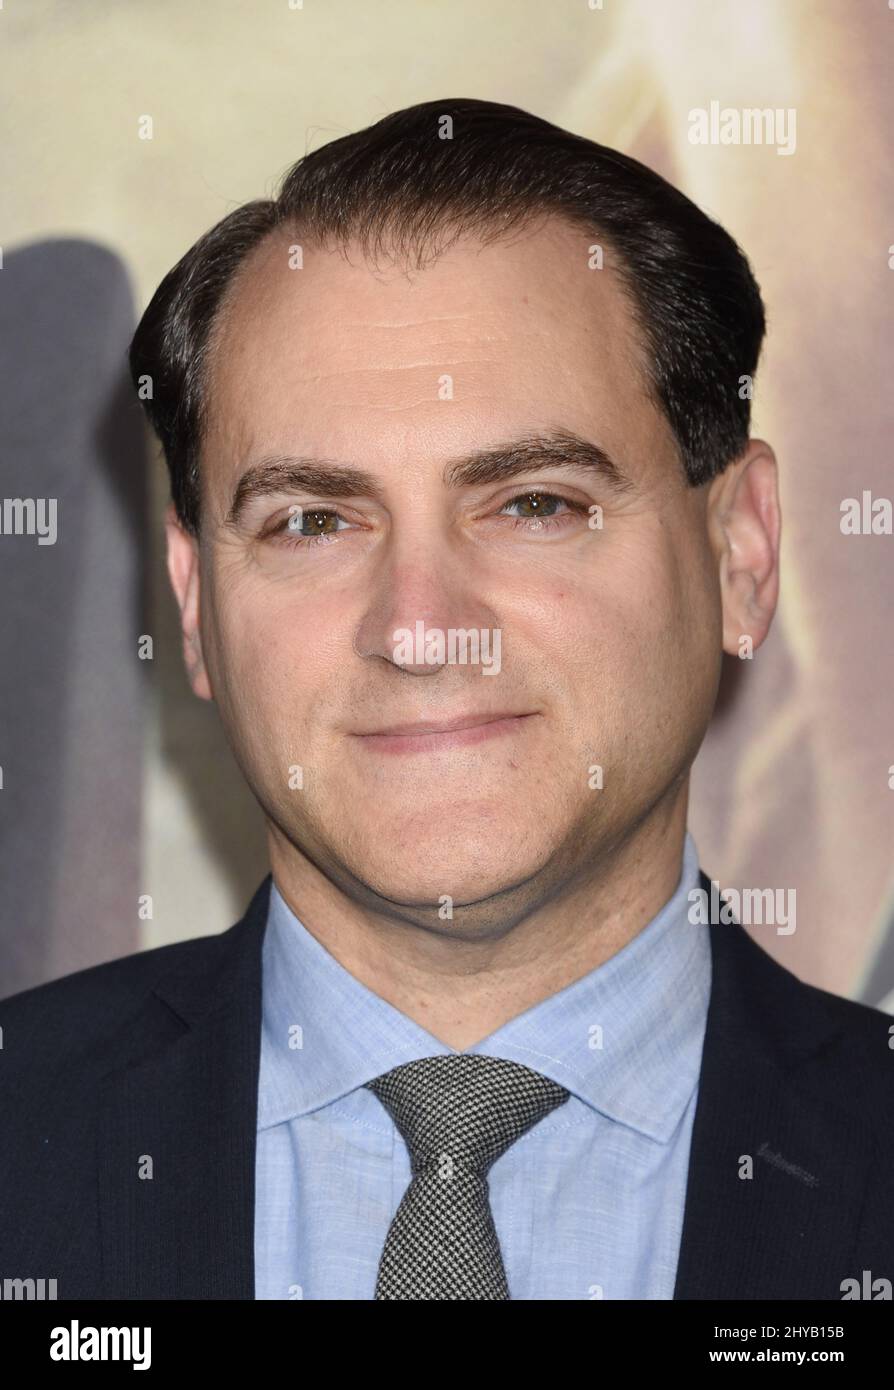 Michael Stuhlbarg arrives at the LA Premiere of 'Arrival' at the Regency Village Theatre on Sunday, Nov. 6, 2016, in Los Angeles. Stock Photo